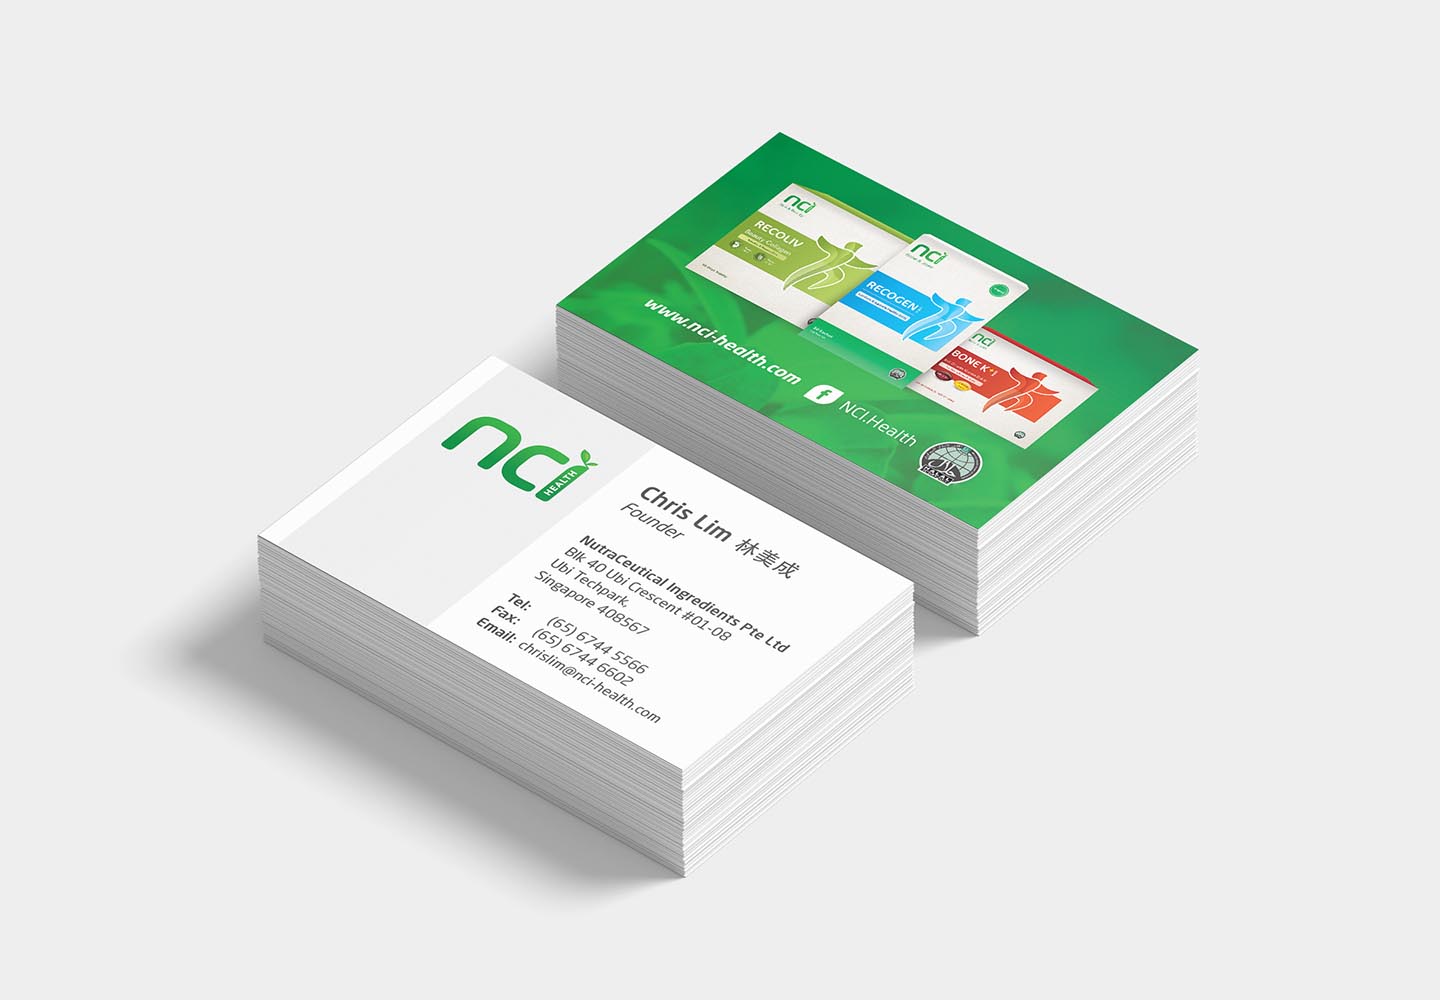 Brand Consultancy in FMCG industry. Business Card for NCI.